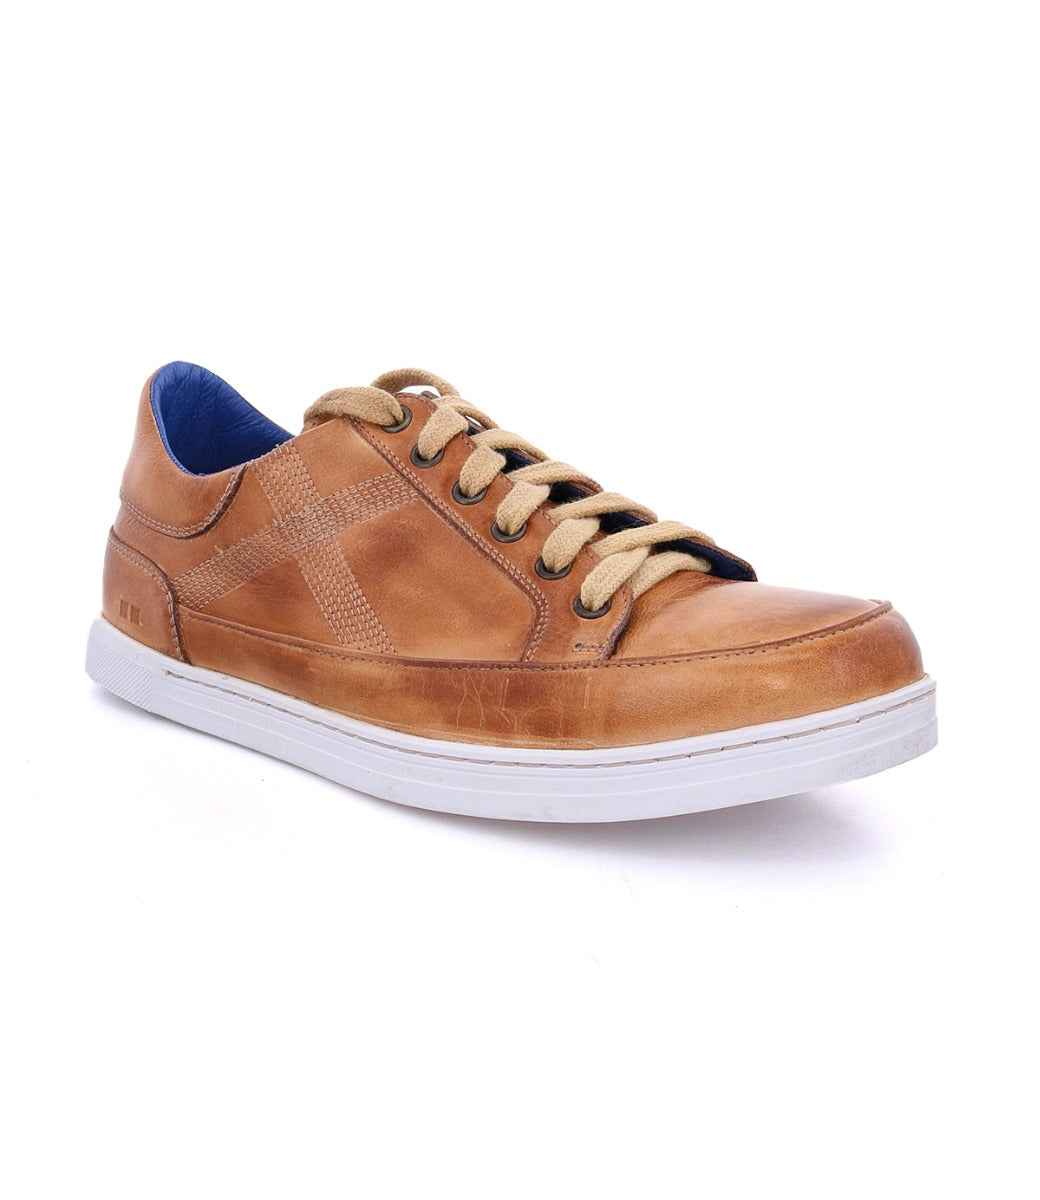 A men's Wizard leather sneaker from Bed Stu with blue laces.